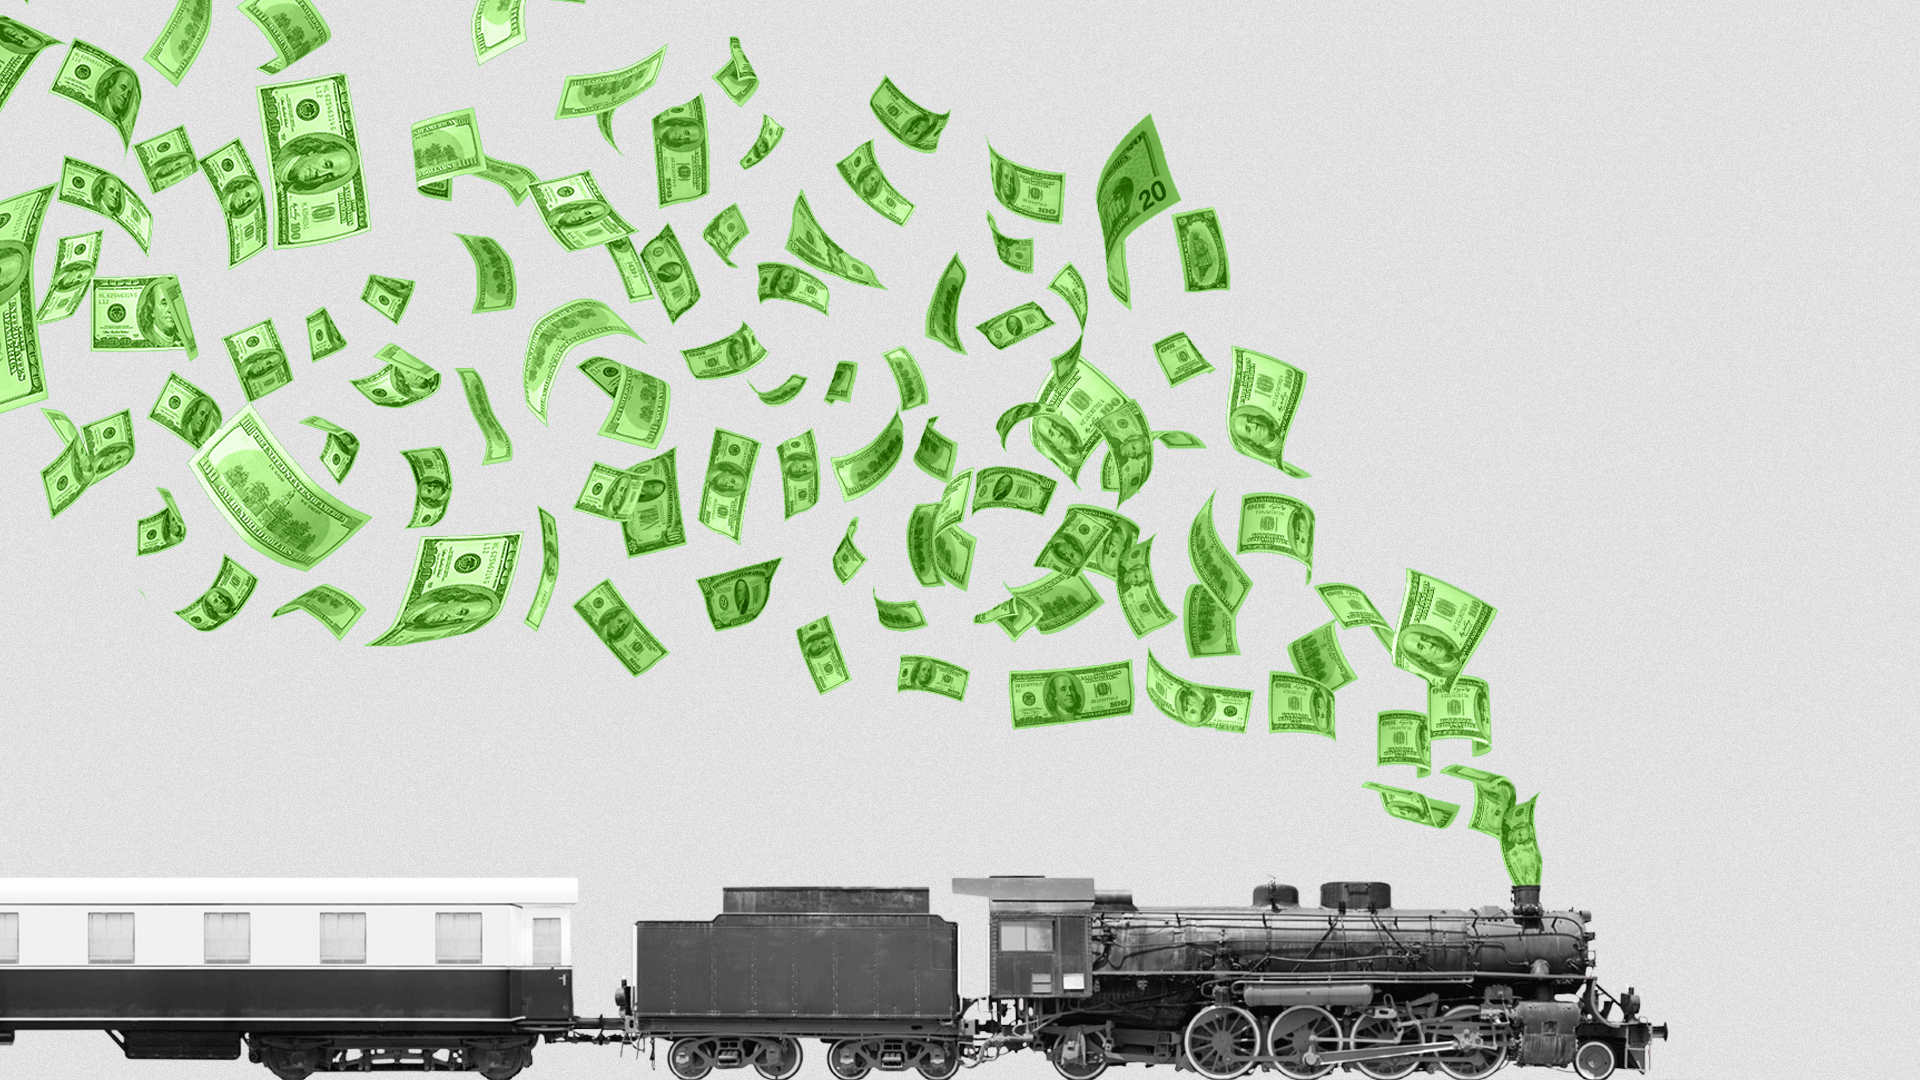 An illustration of A freight train with money coming out of the smoke stack